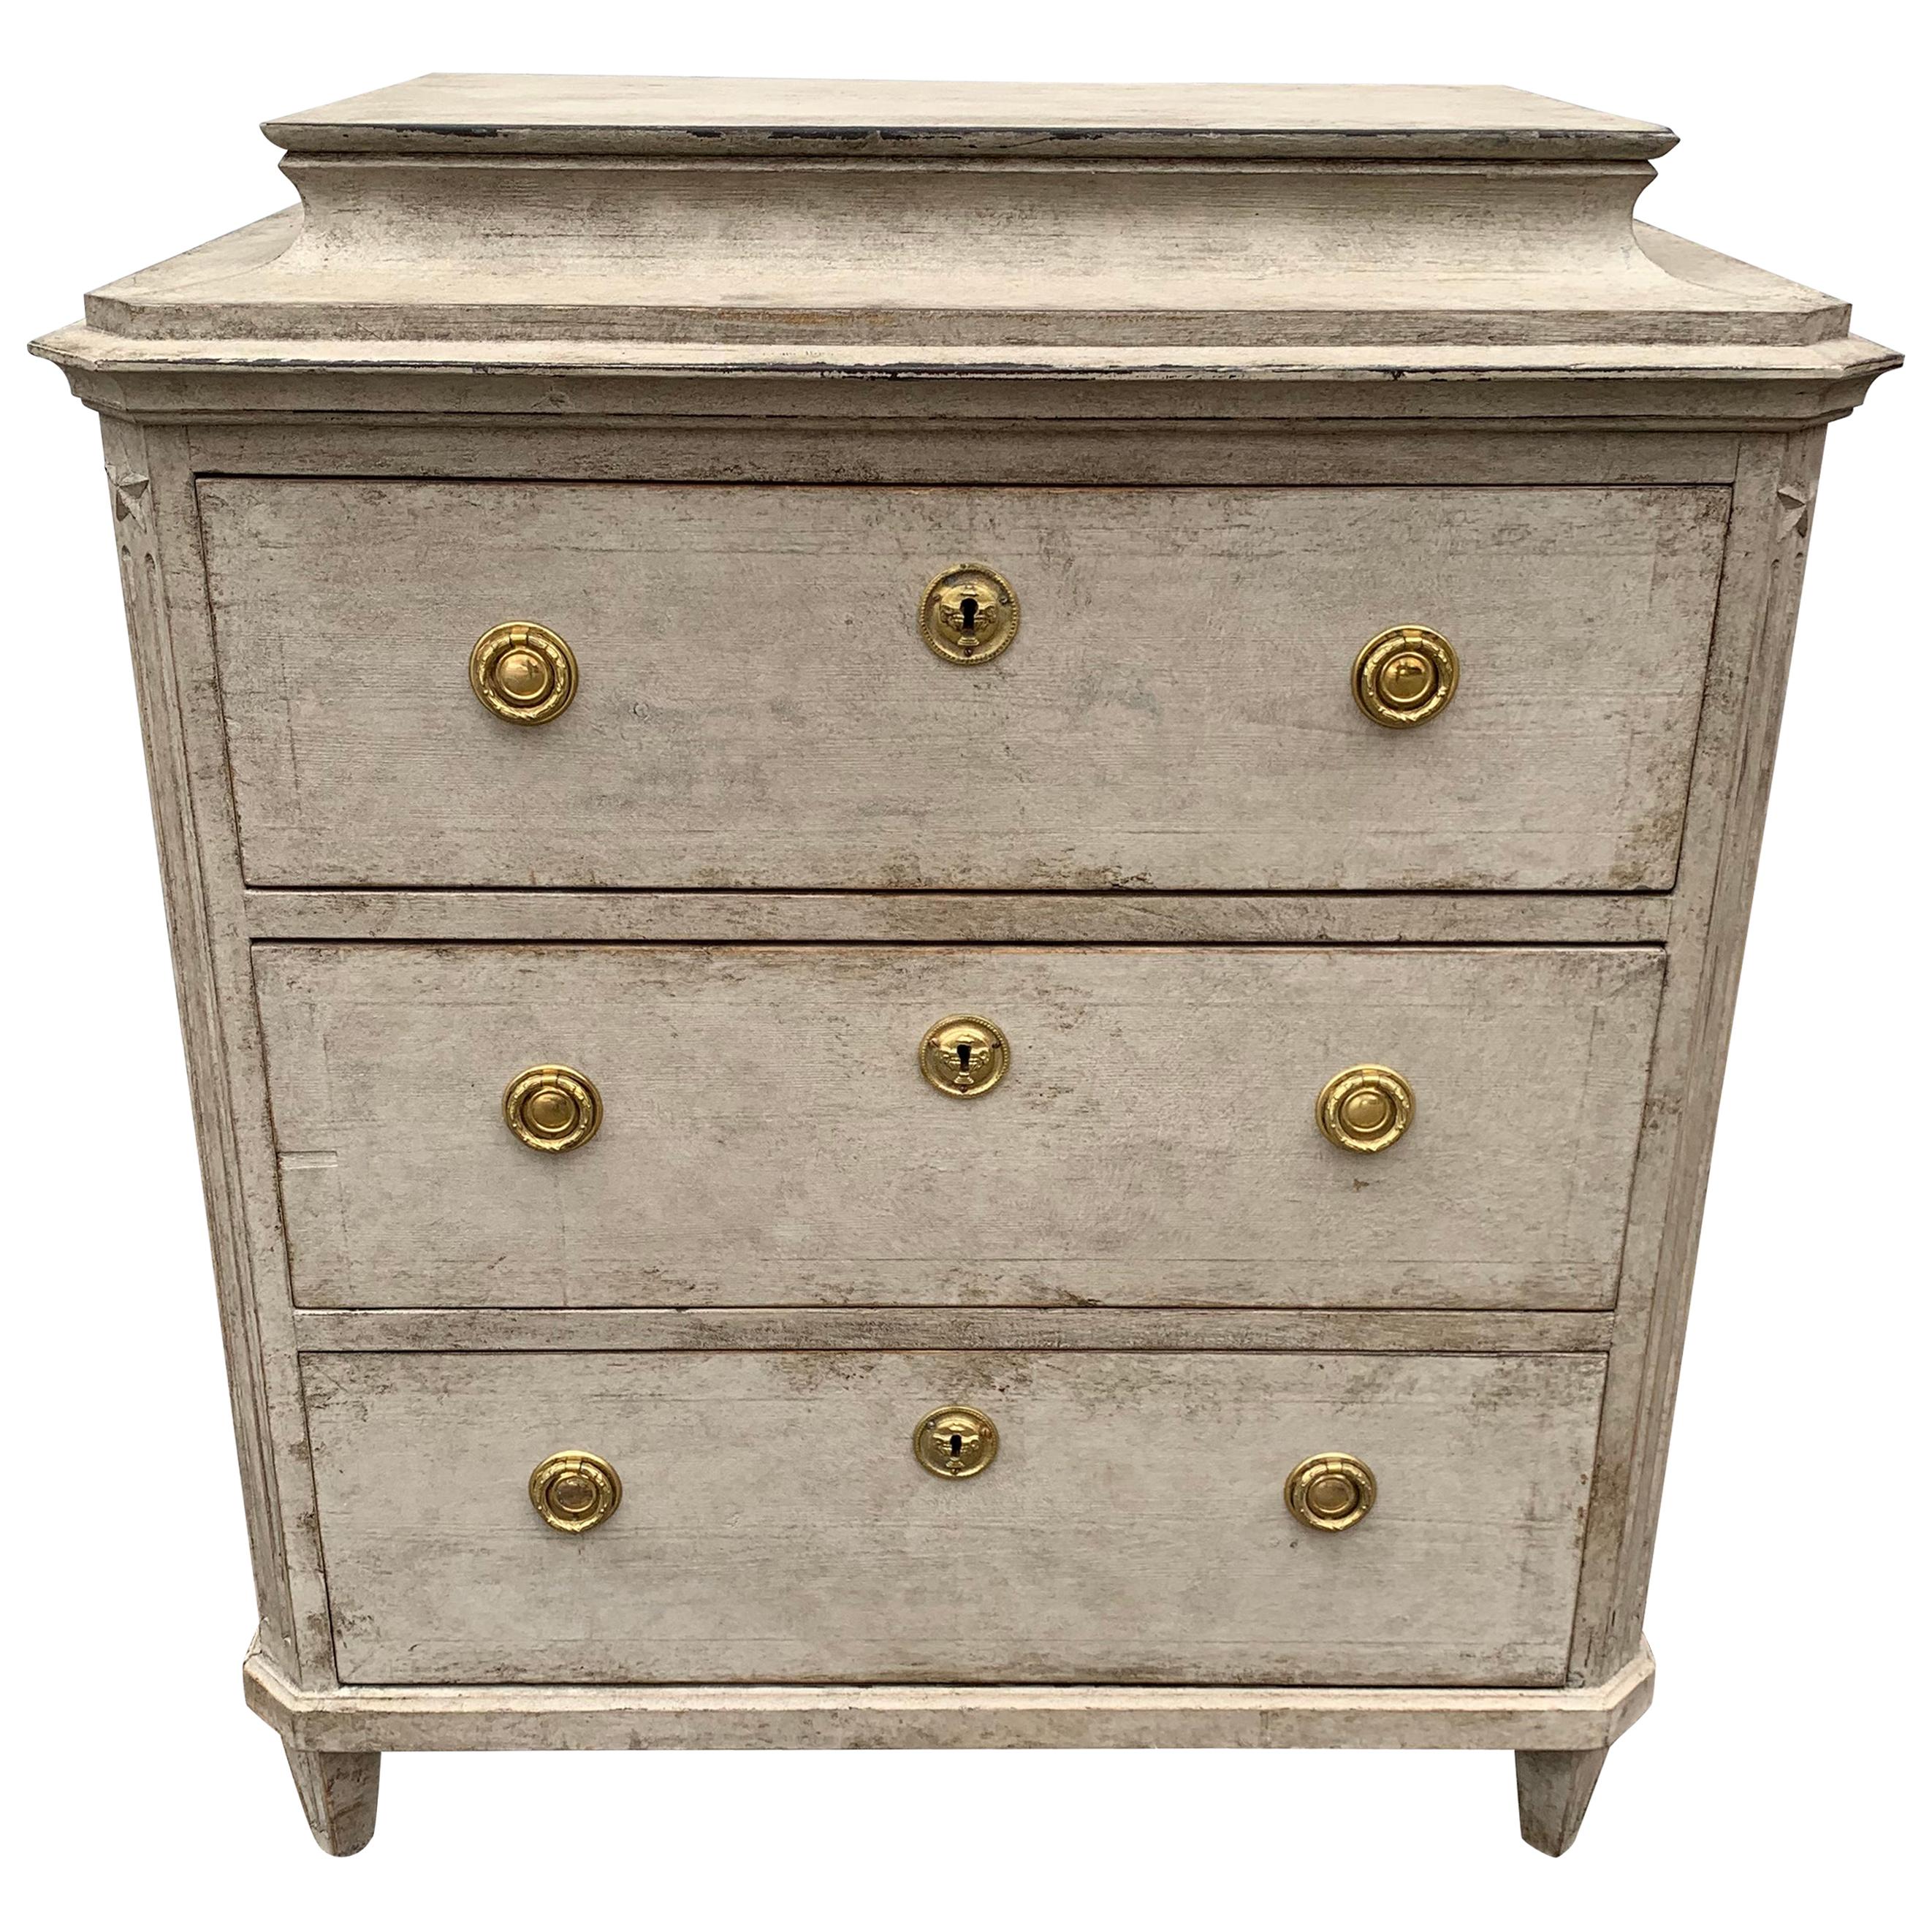 19th Century Gray-Painted Gustavian Style Chest of Drawers, Sweden